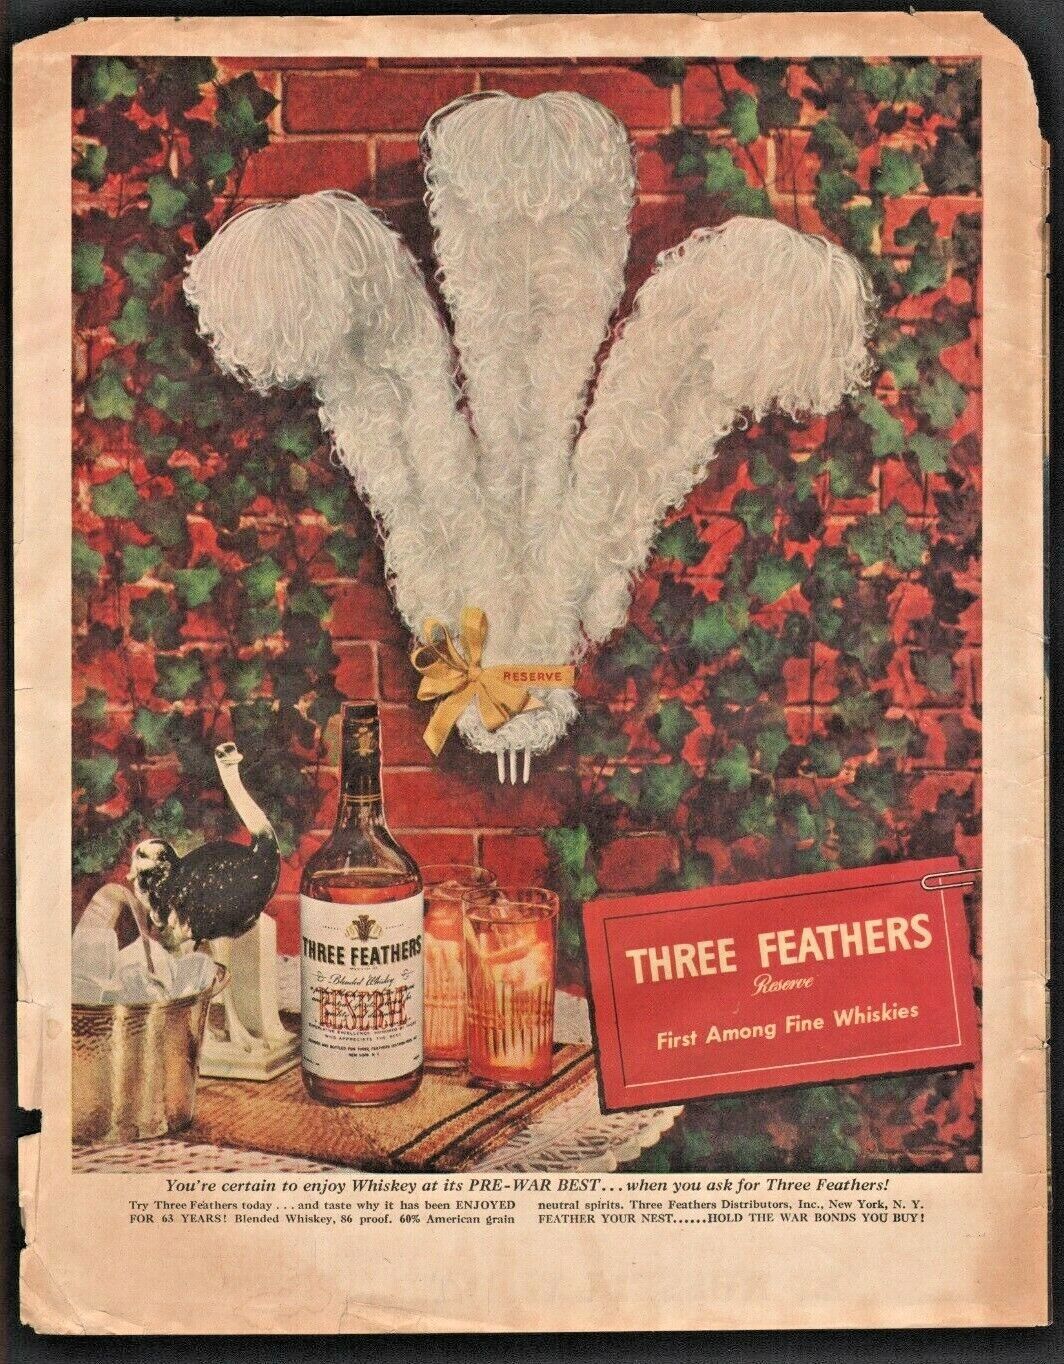 1945 Three Feathers Reserve Blended Whiskey - Vintage Ostrich Bird Liquor Ad